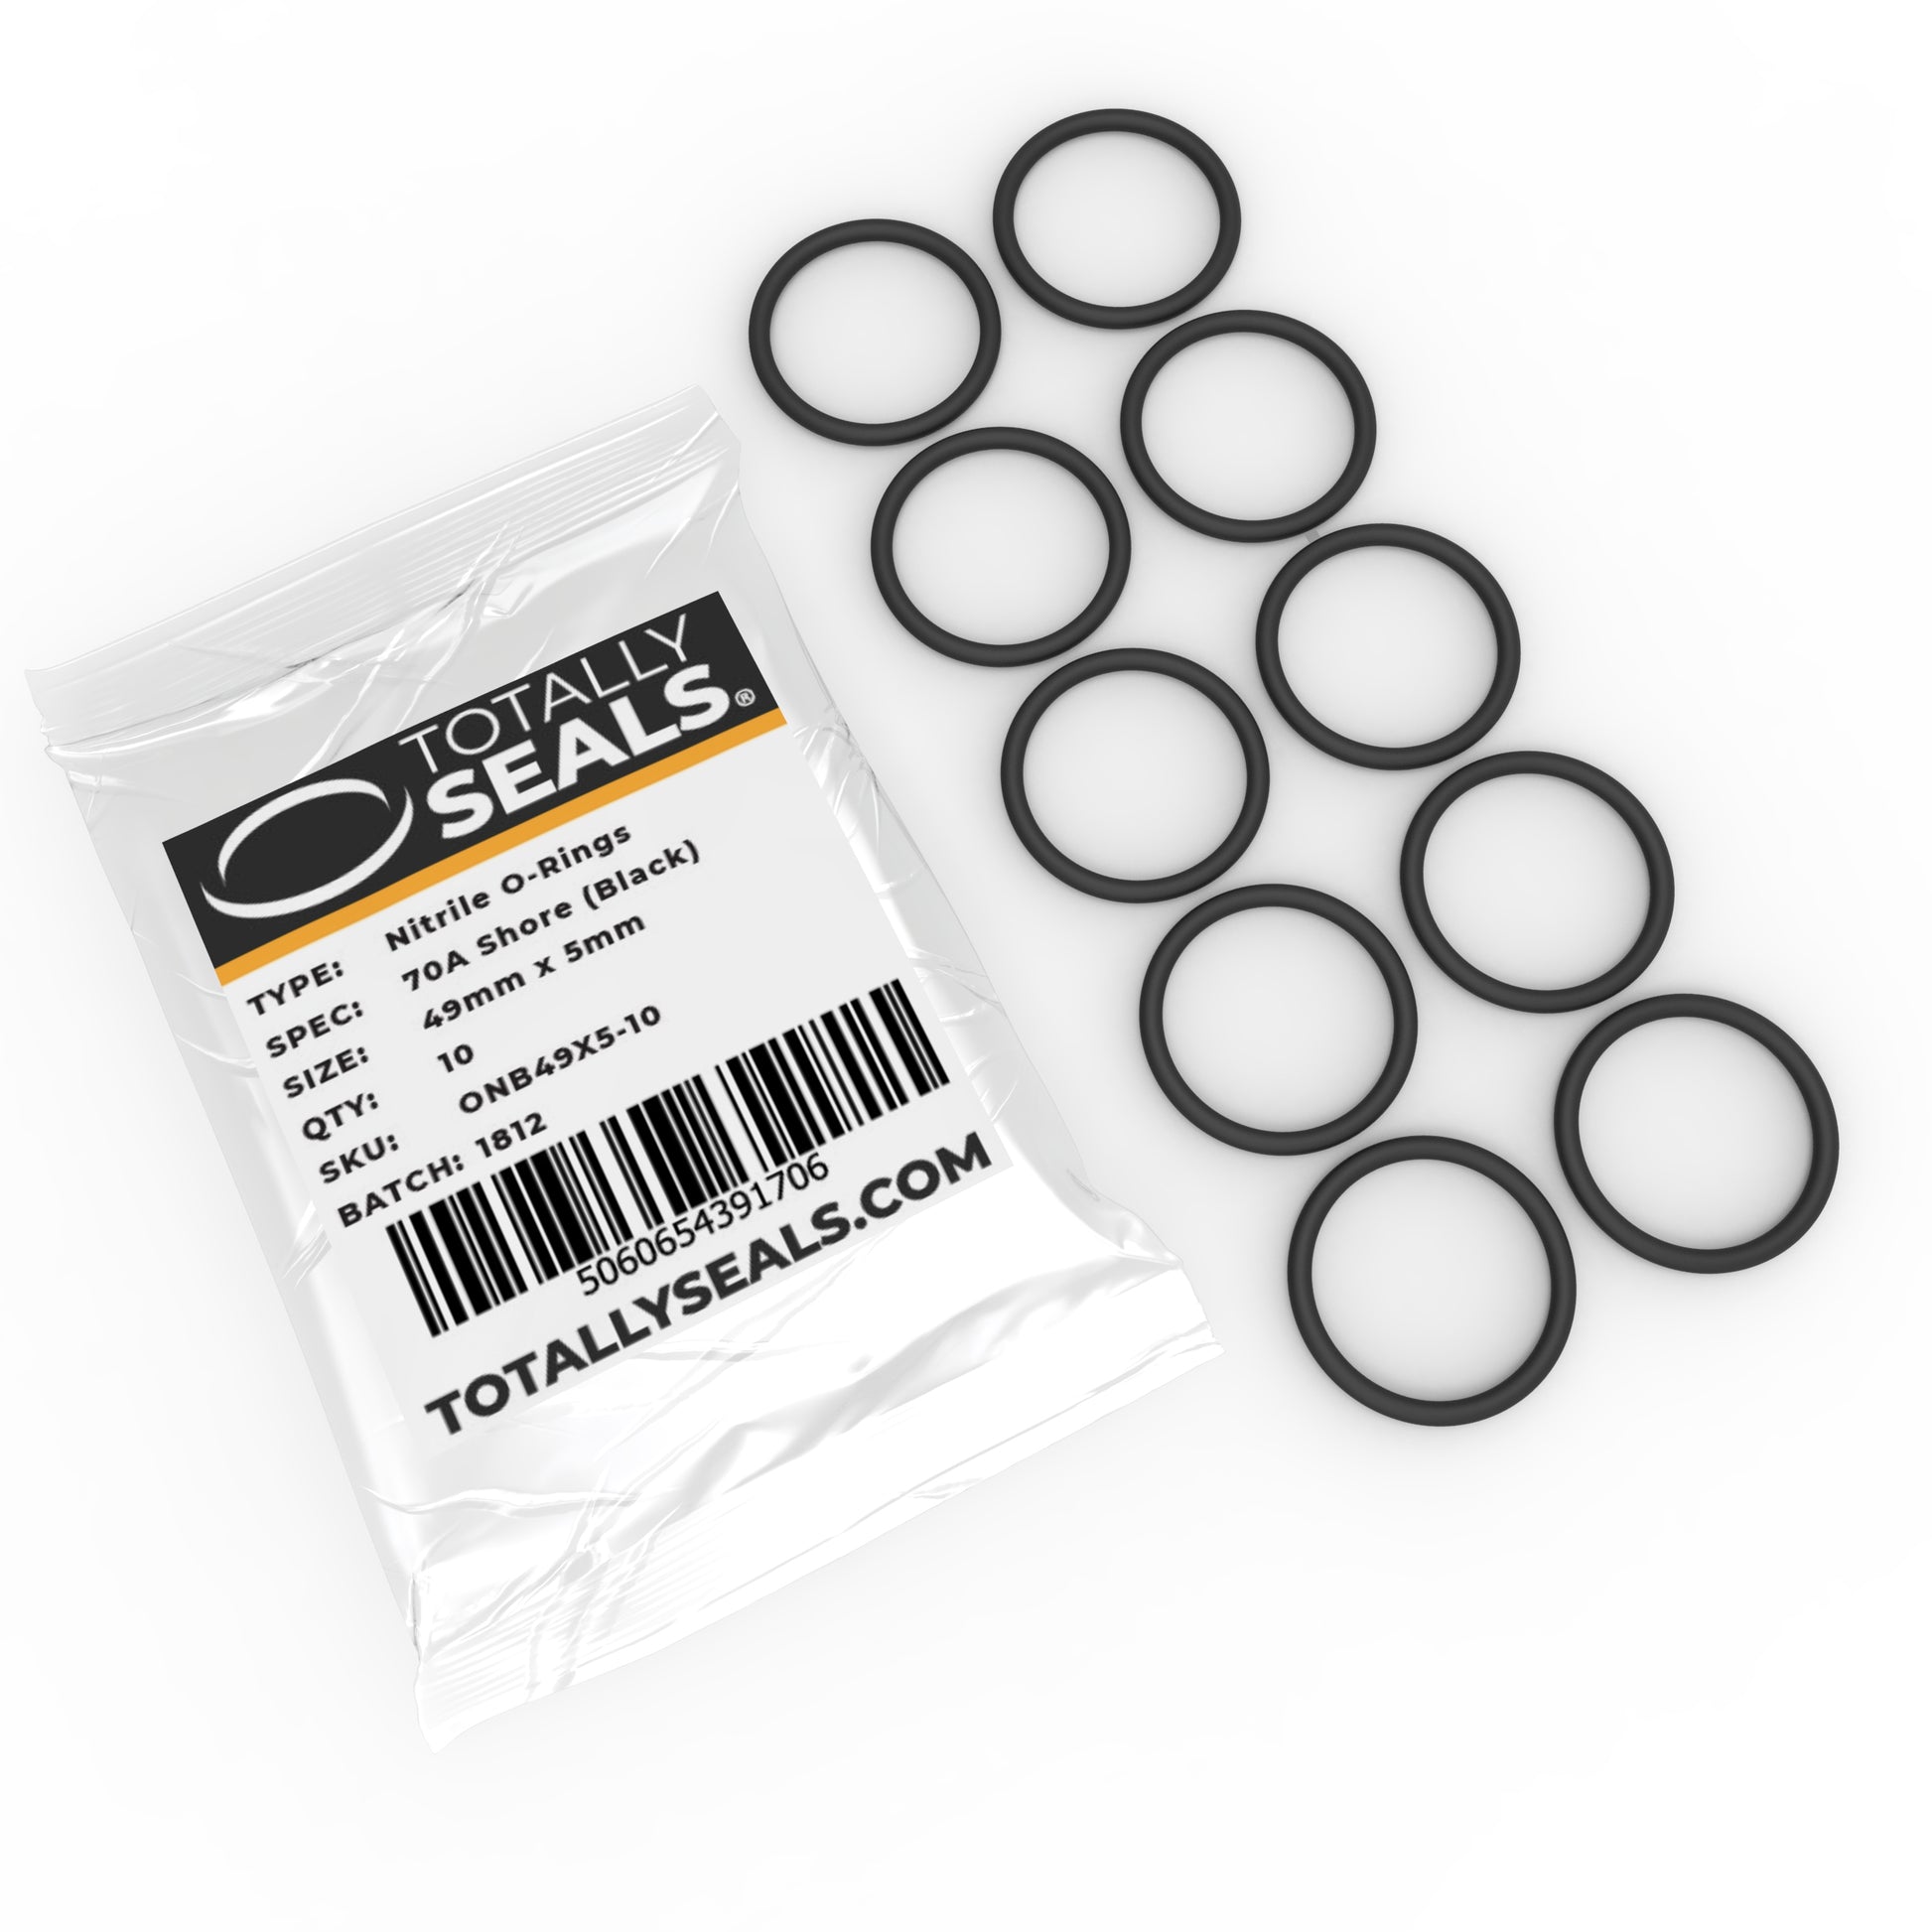 49mm x 5mm (59mm OD) Nitrile O-Rings - Totally Seals®